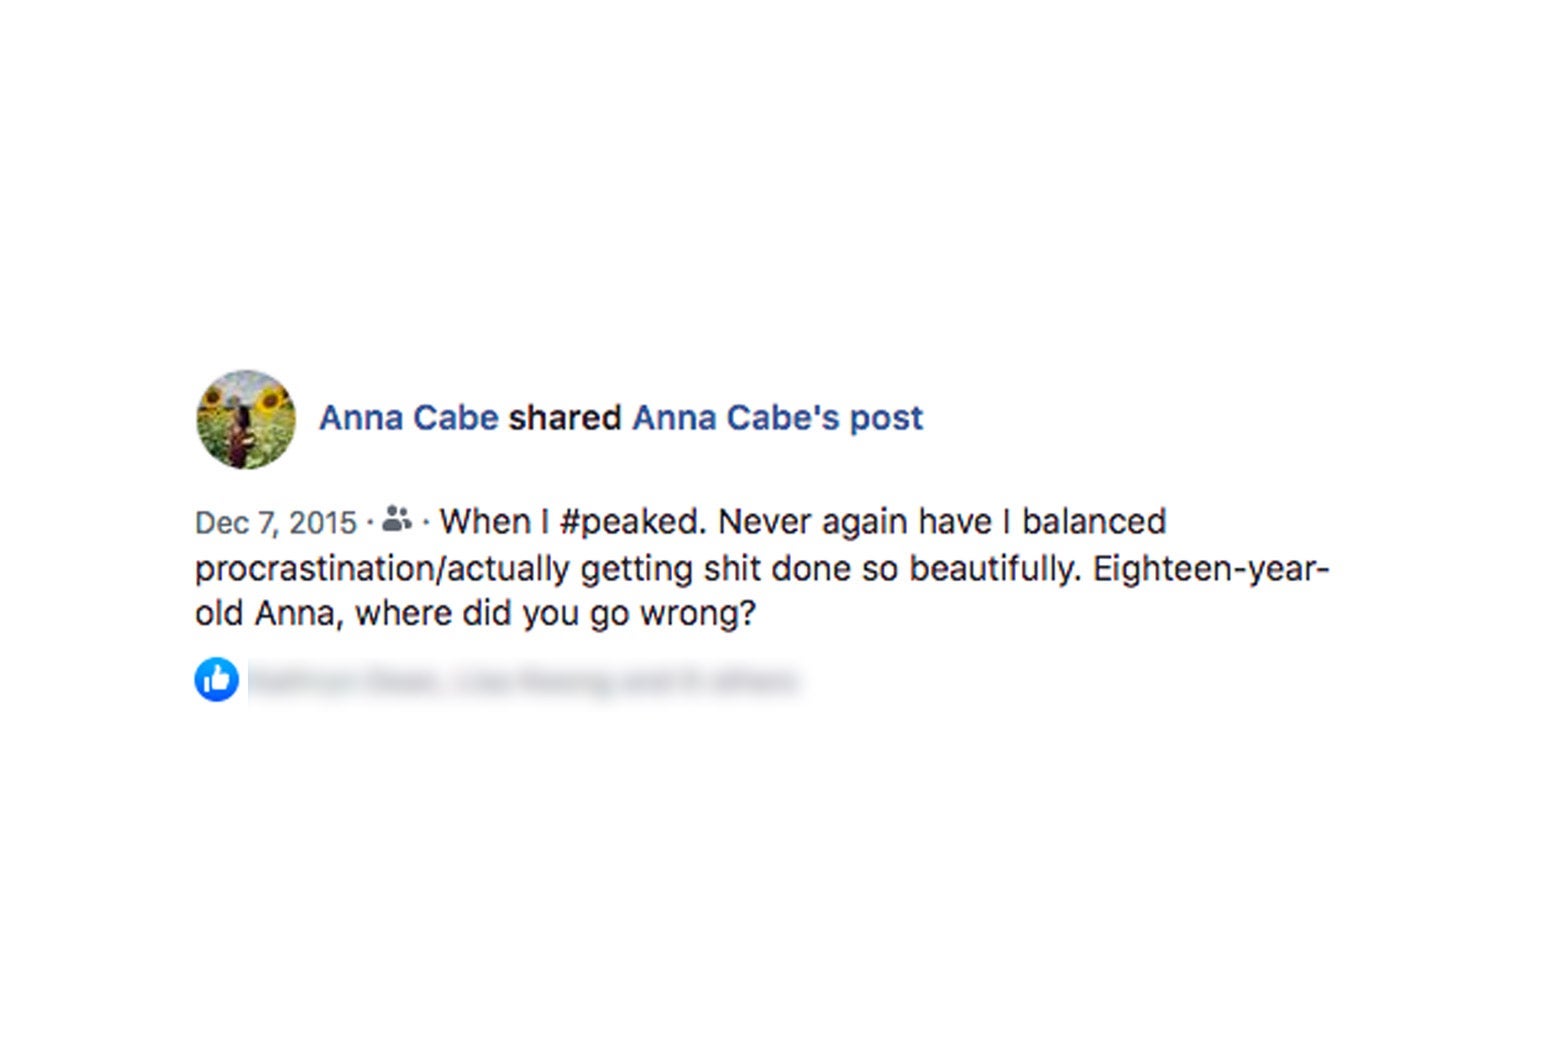 Screenshot of author's Facebook post referring to earlier post, saying "When I peaked. Never again have I balanced procrastination/actually getting shit done so beautifully. Eighteen-year-old Anna, where did you go wrong?"